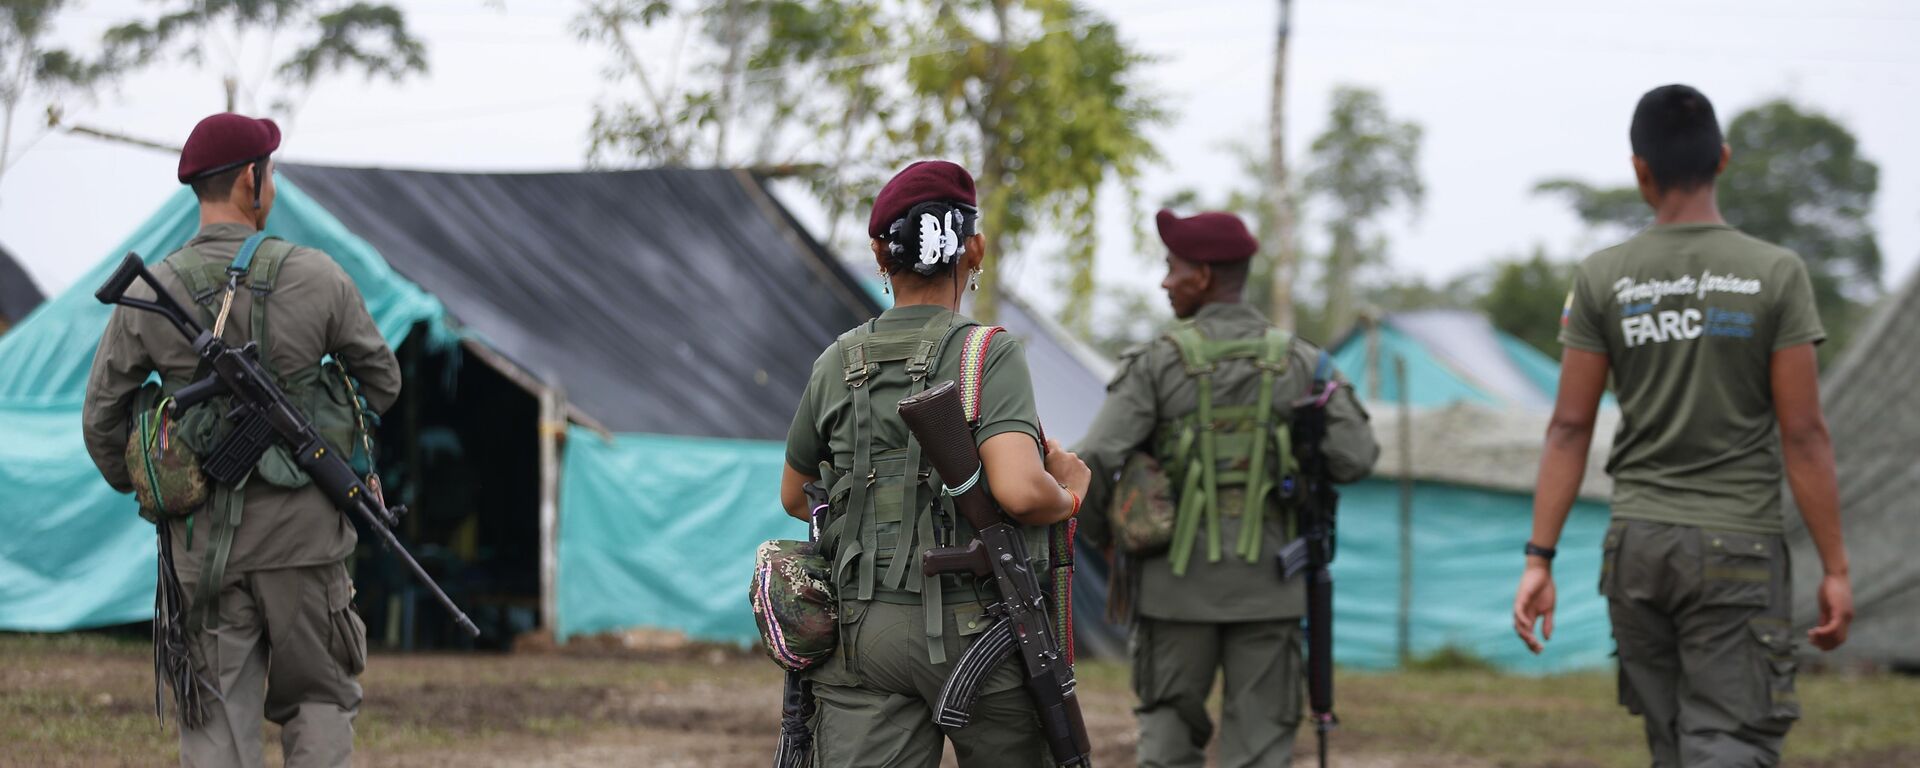 Revolutionary Armed Forces of Colombia, FARC, rebels walk in their camp in La Carmelita near Puerto Asis in Colombia's southwestern state of Putumayo, Tuesday, Feb. 28, 2017 - Sputnik International, 1920, 30.11.2021